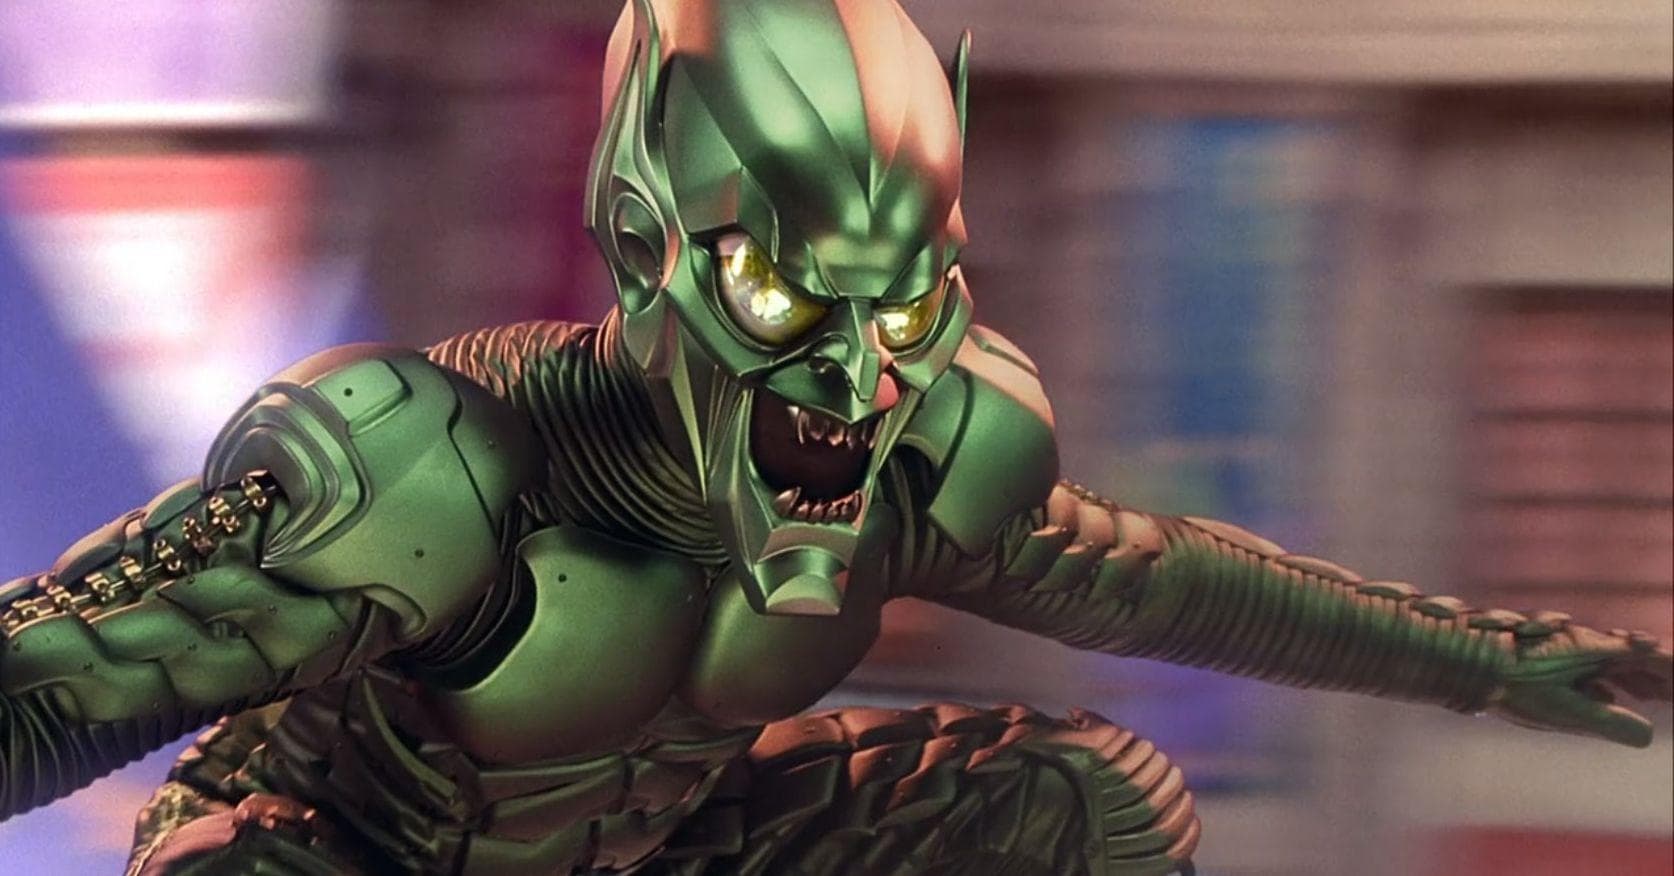 Ranking All The Actors To Play Spider-Man Villains, Best To Worst